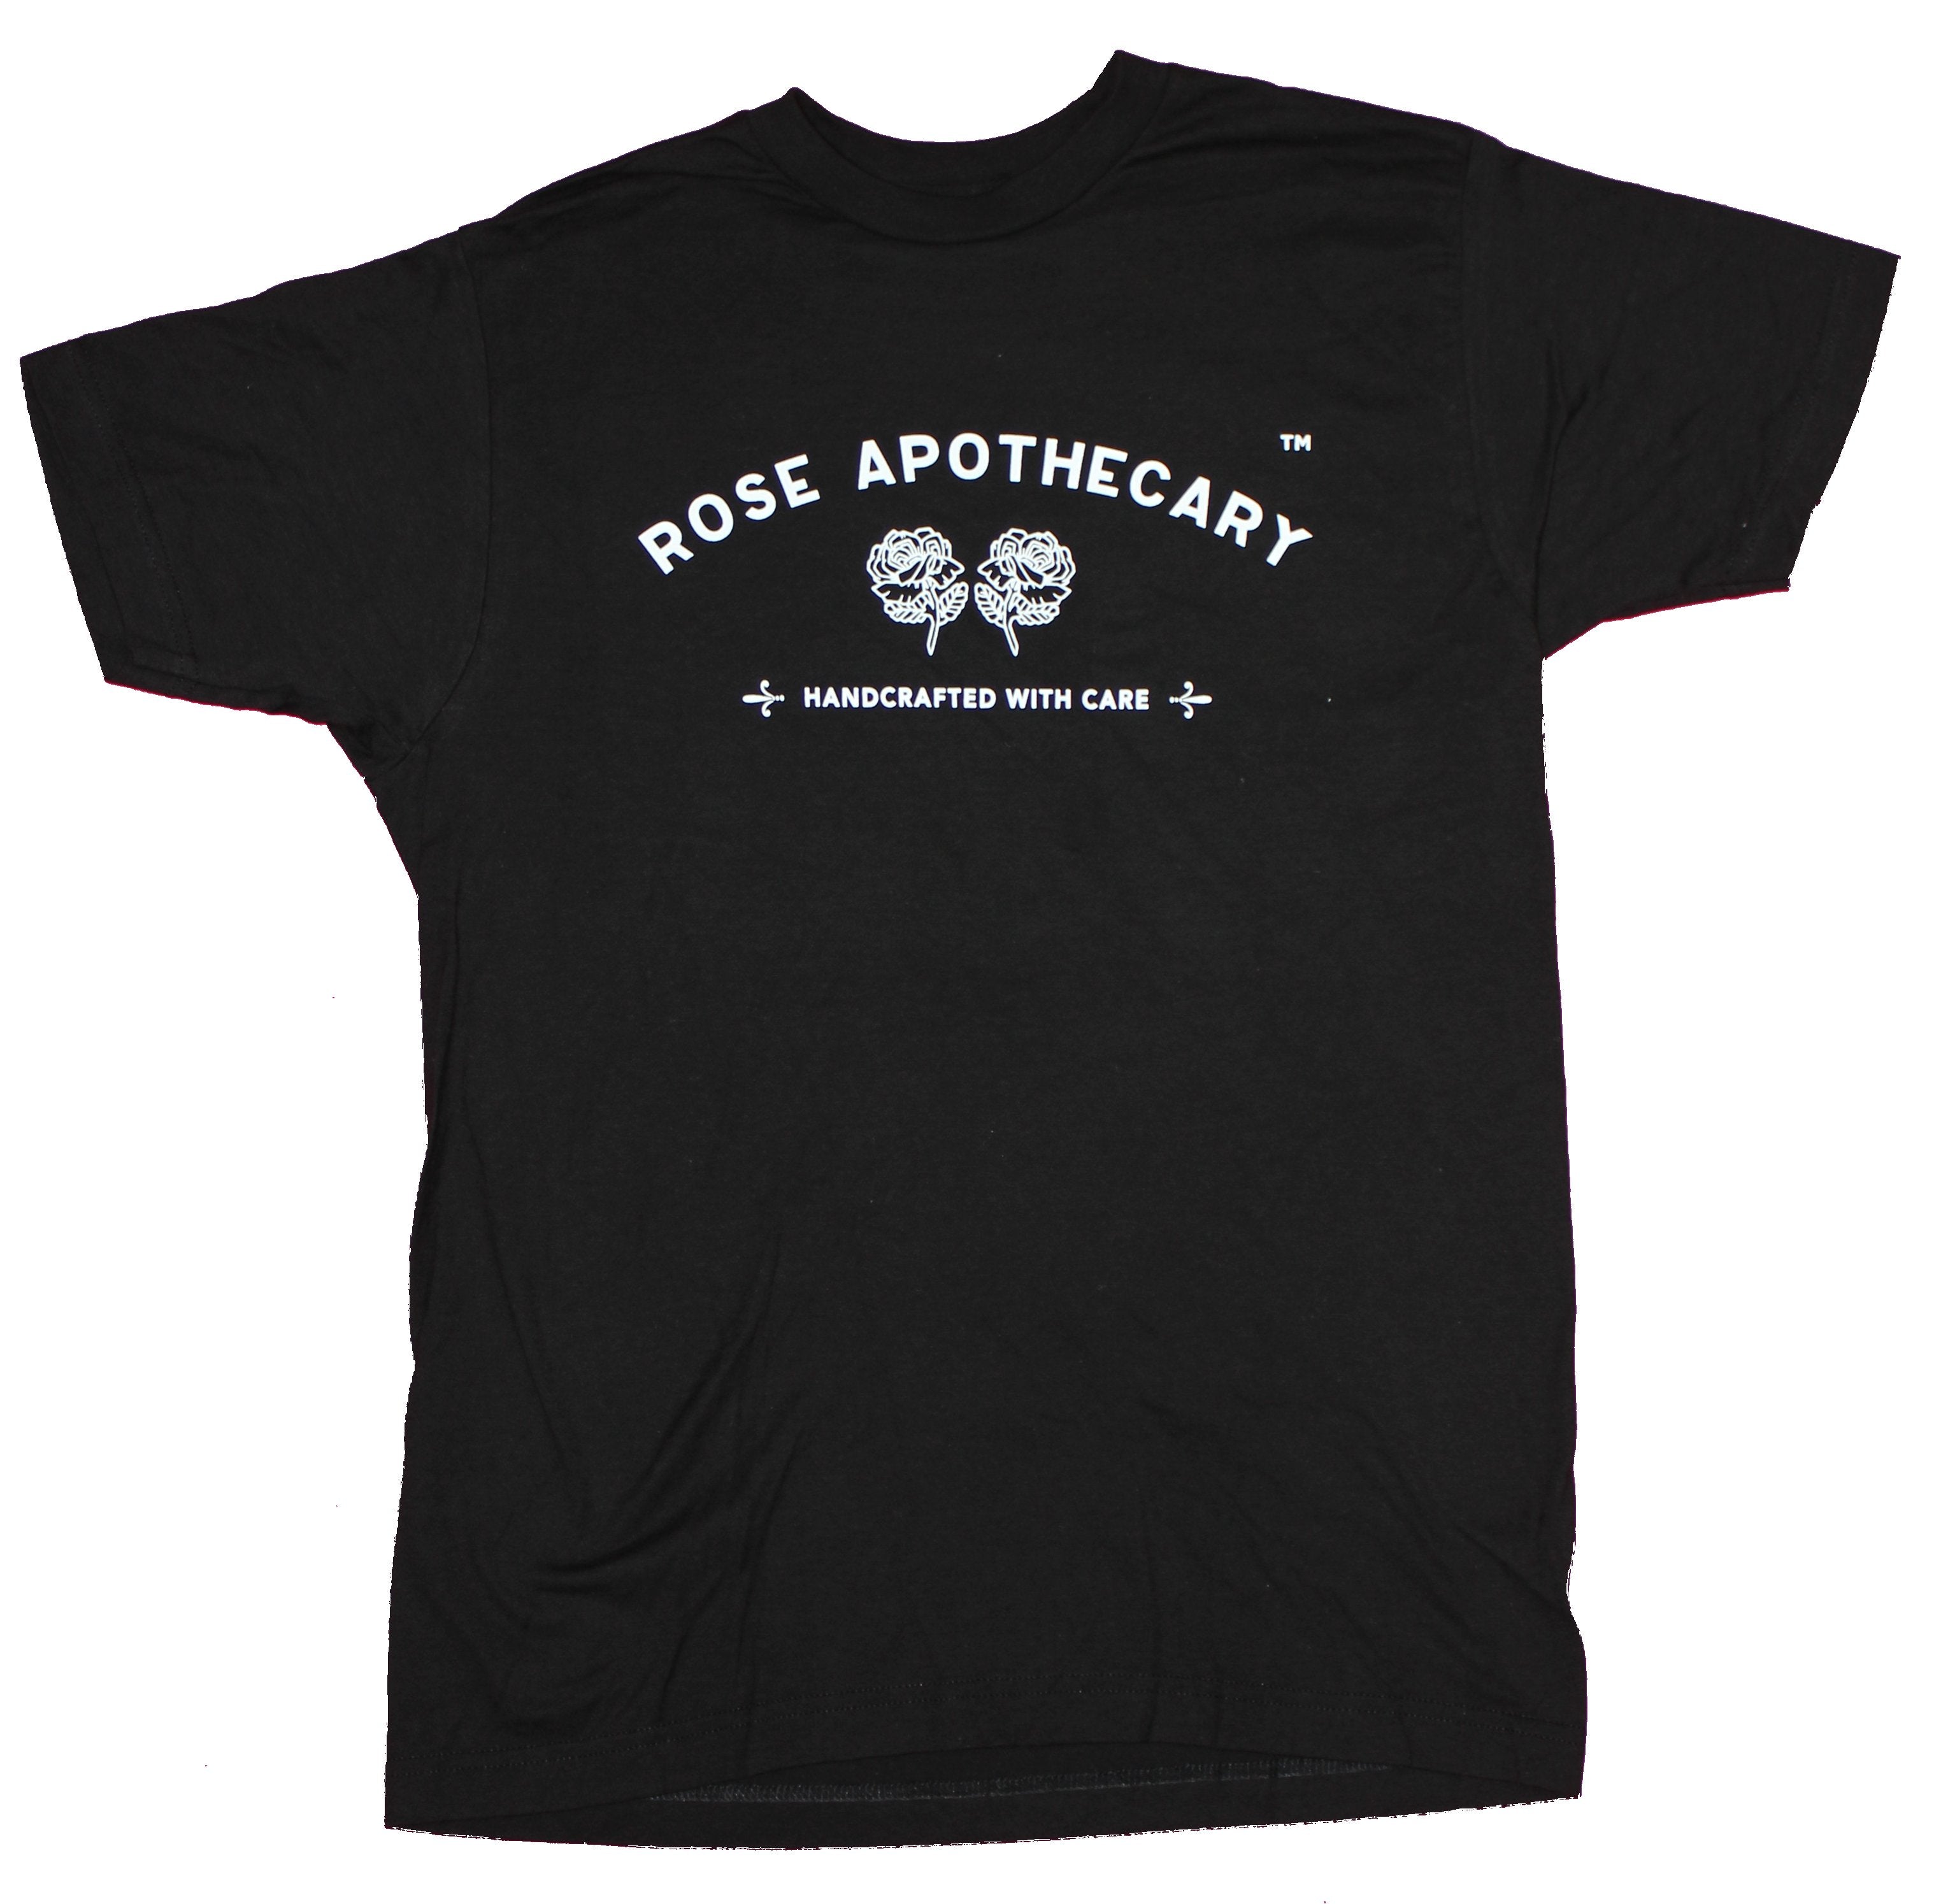 Schitt's Creek Mens T-Shirt  - Rose Apothecary Handcrafted With Care